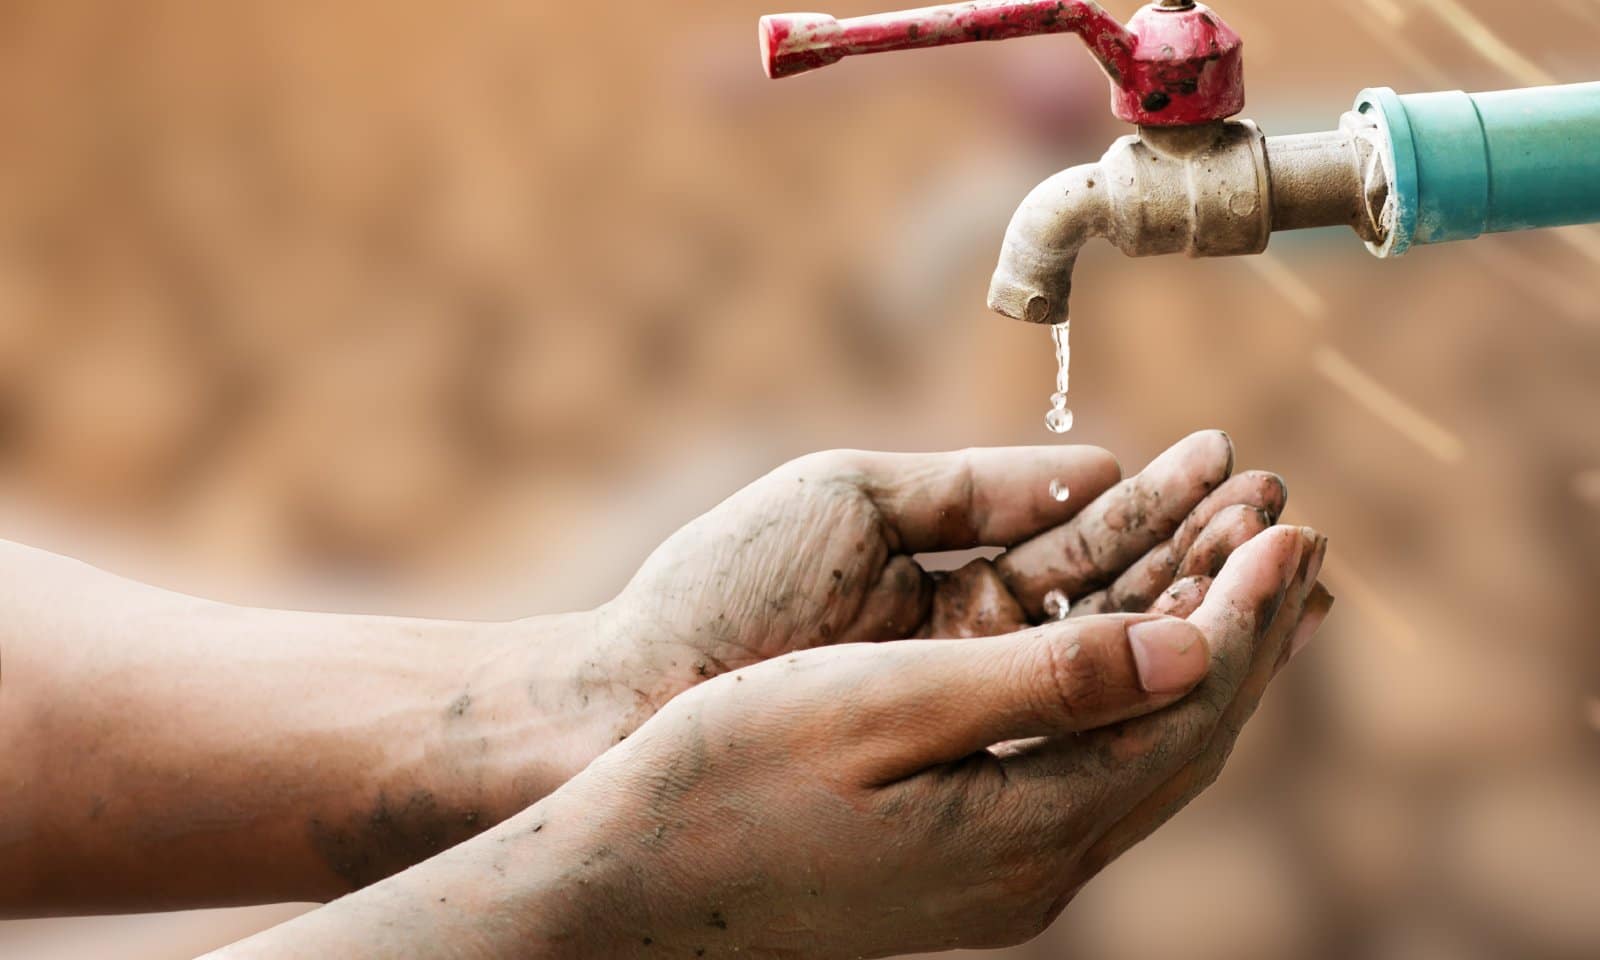 Image Credit: Shutterstock / Keshi Studio <p>Respecting and conserving water is central to many indigenous teachings. Adopting water-saving techniques in our homes and communities can help preserve this vital resource.</p>